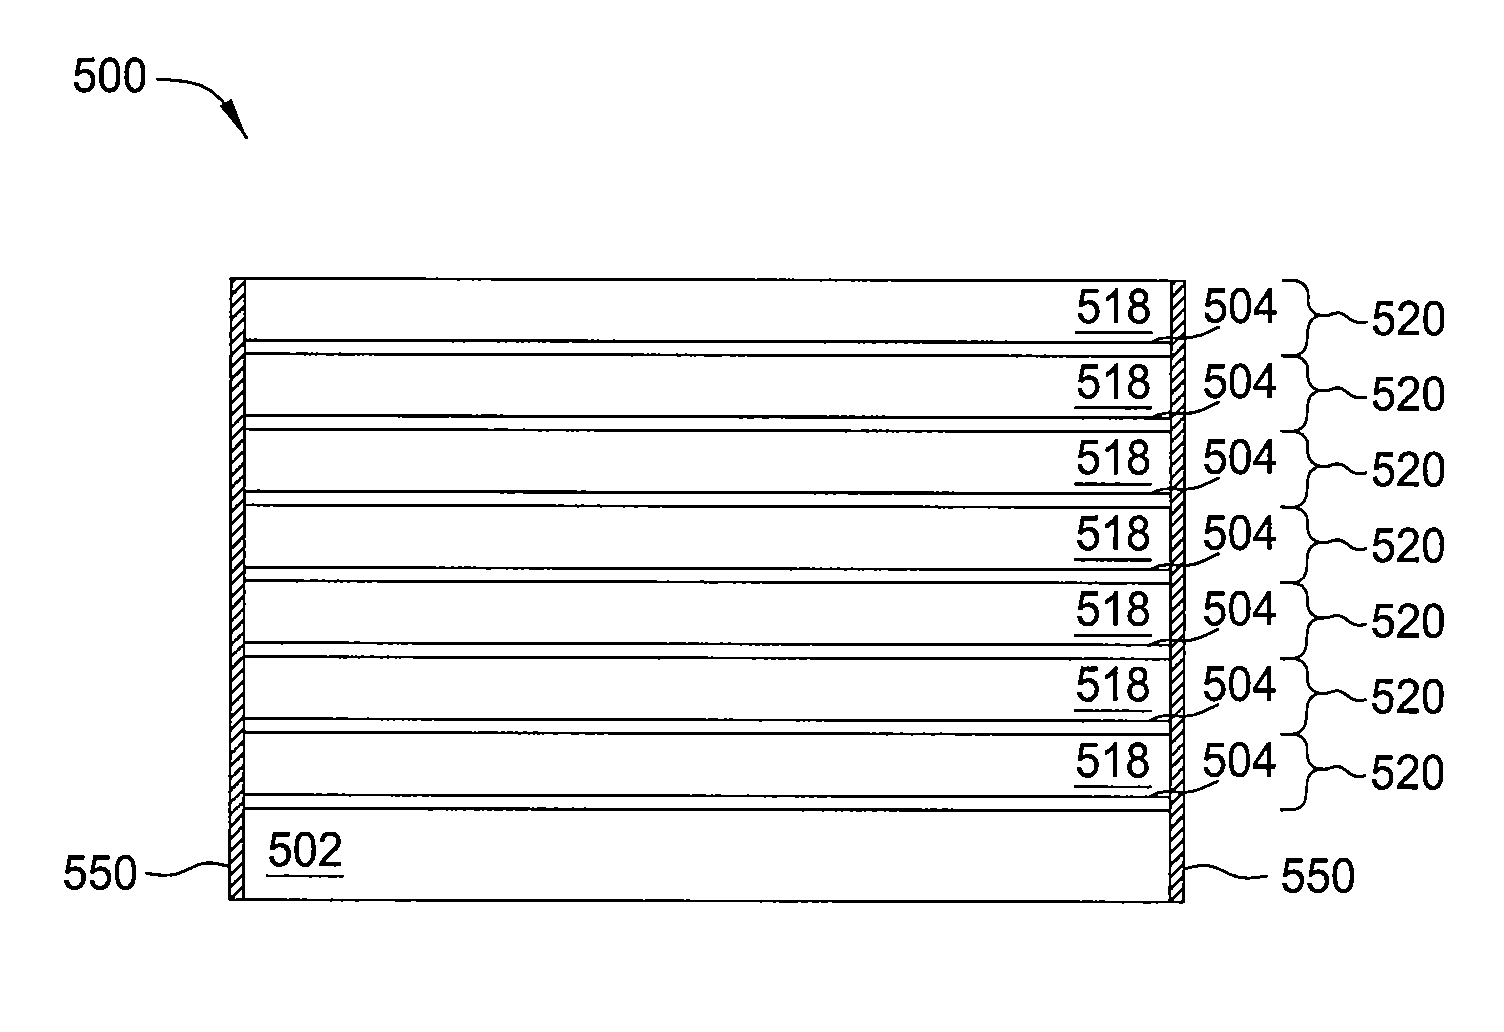 Multiple stack deposition for epitaxial lift off